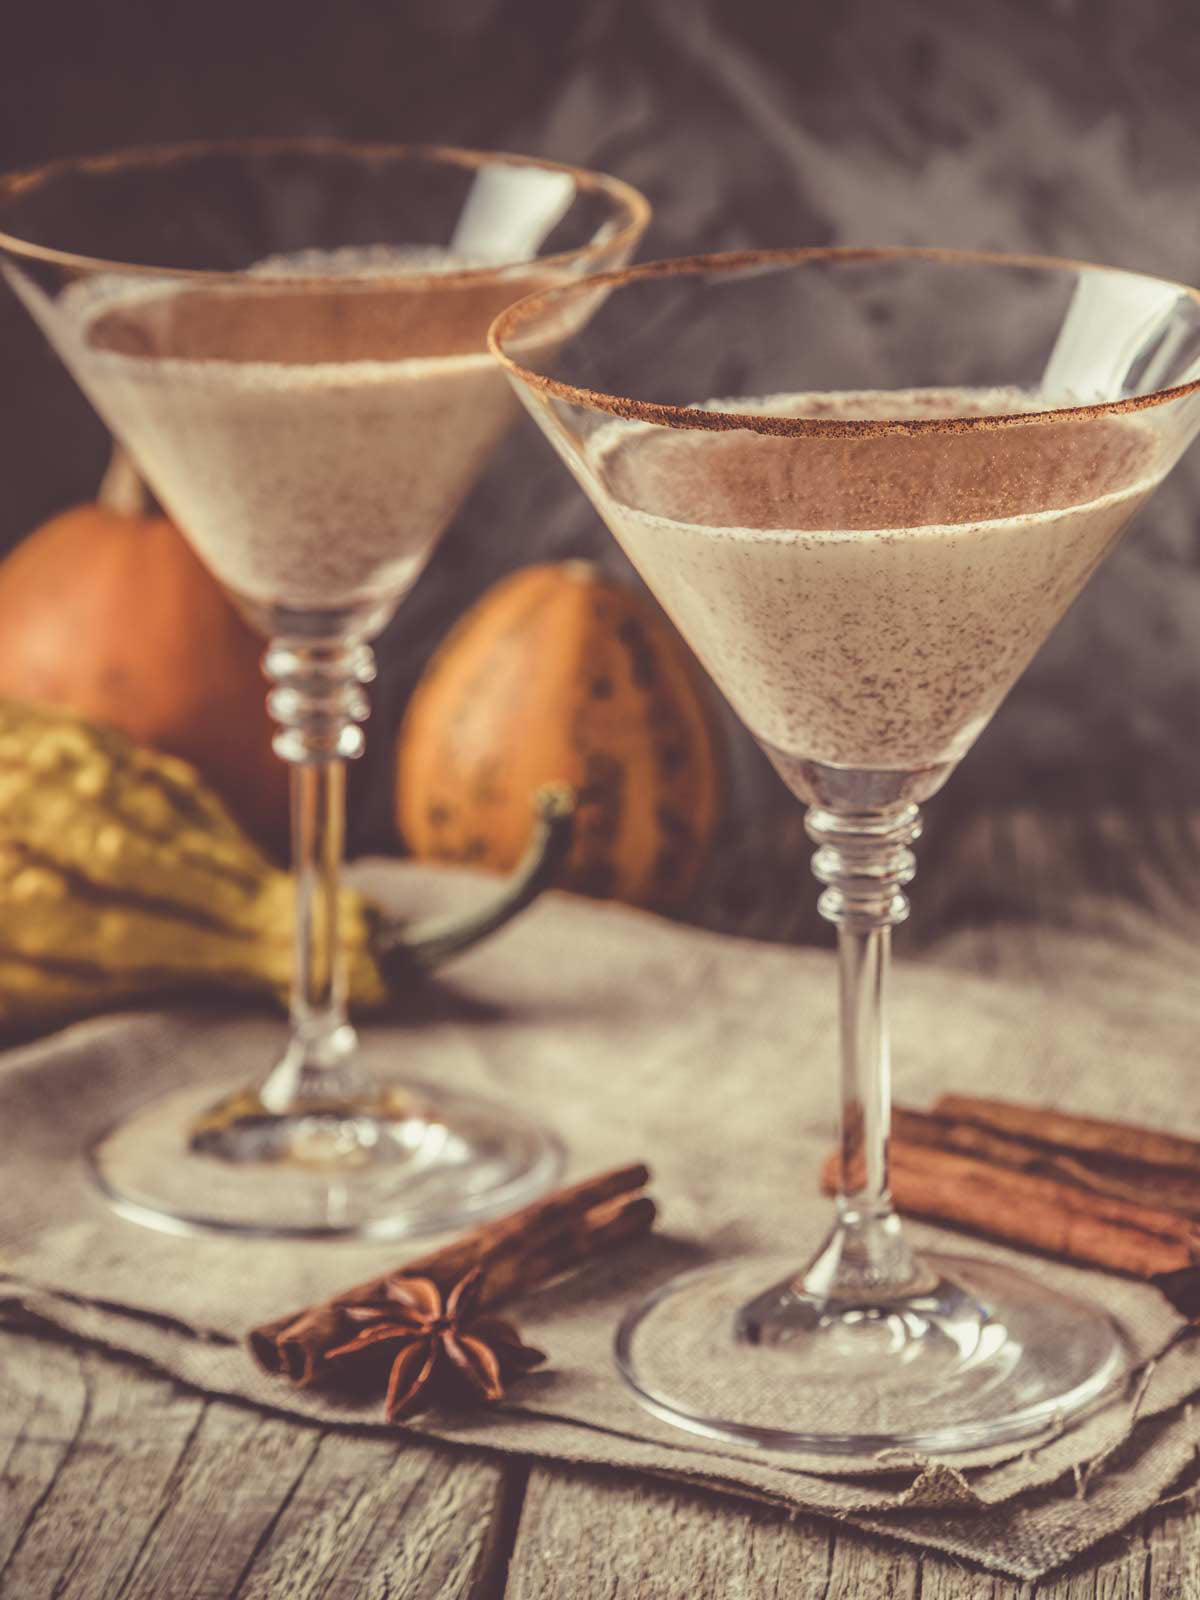 dairy-free buttered pecan pie cocktails in martini glasses